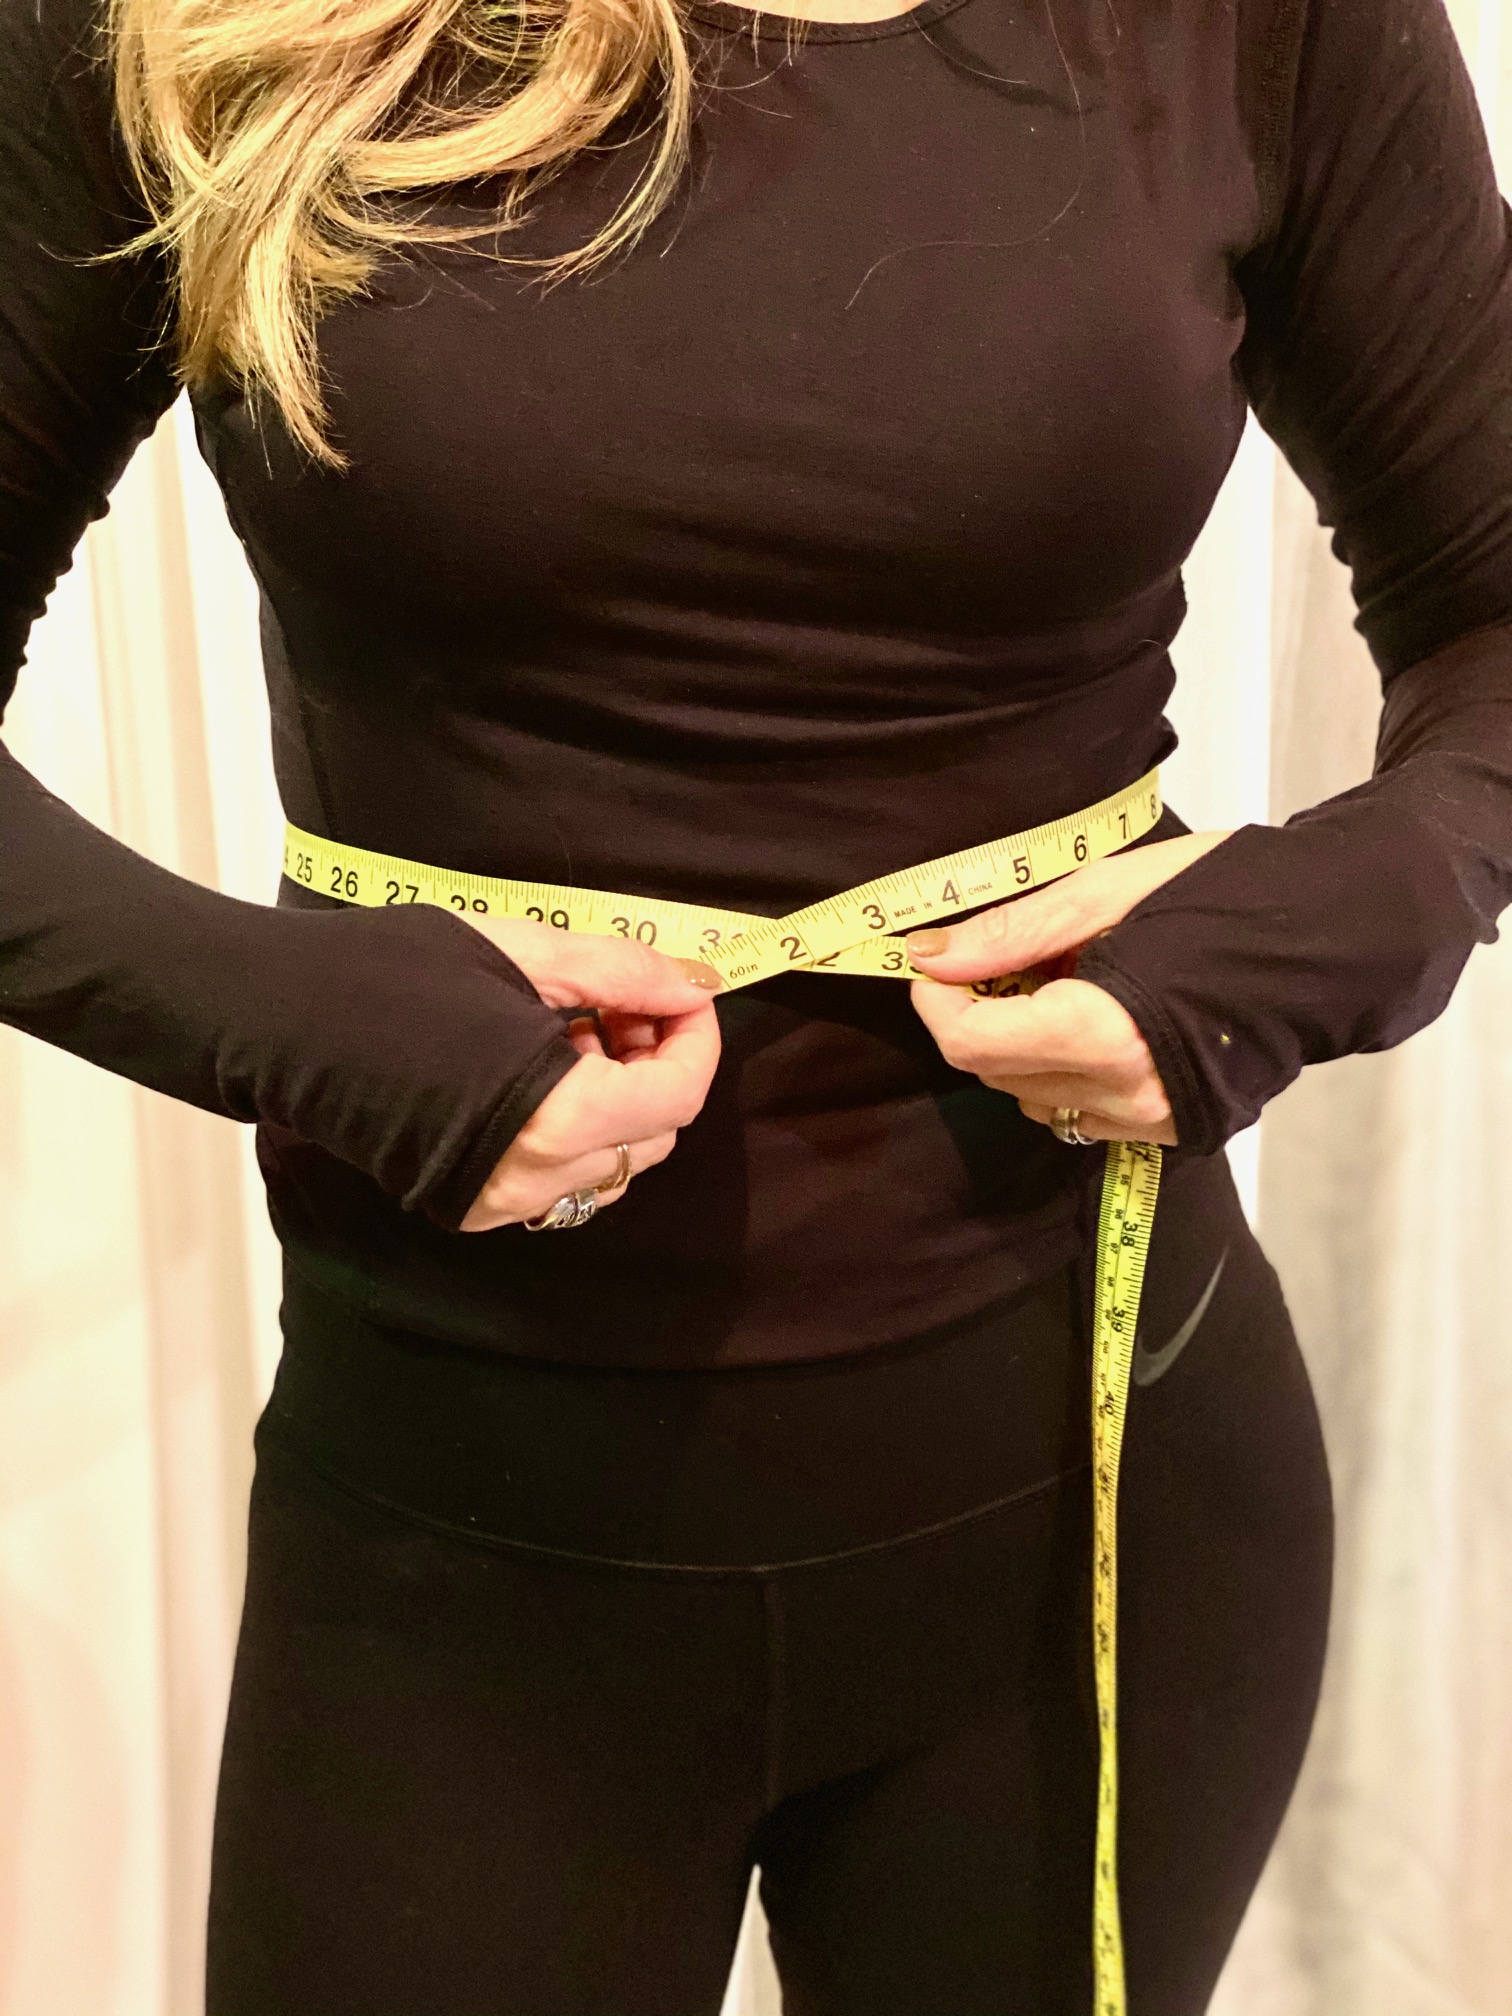 How I lost 15 pounds